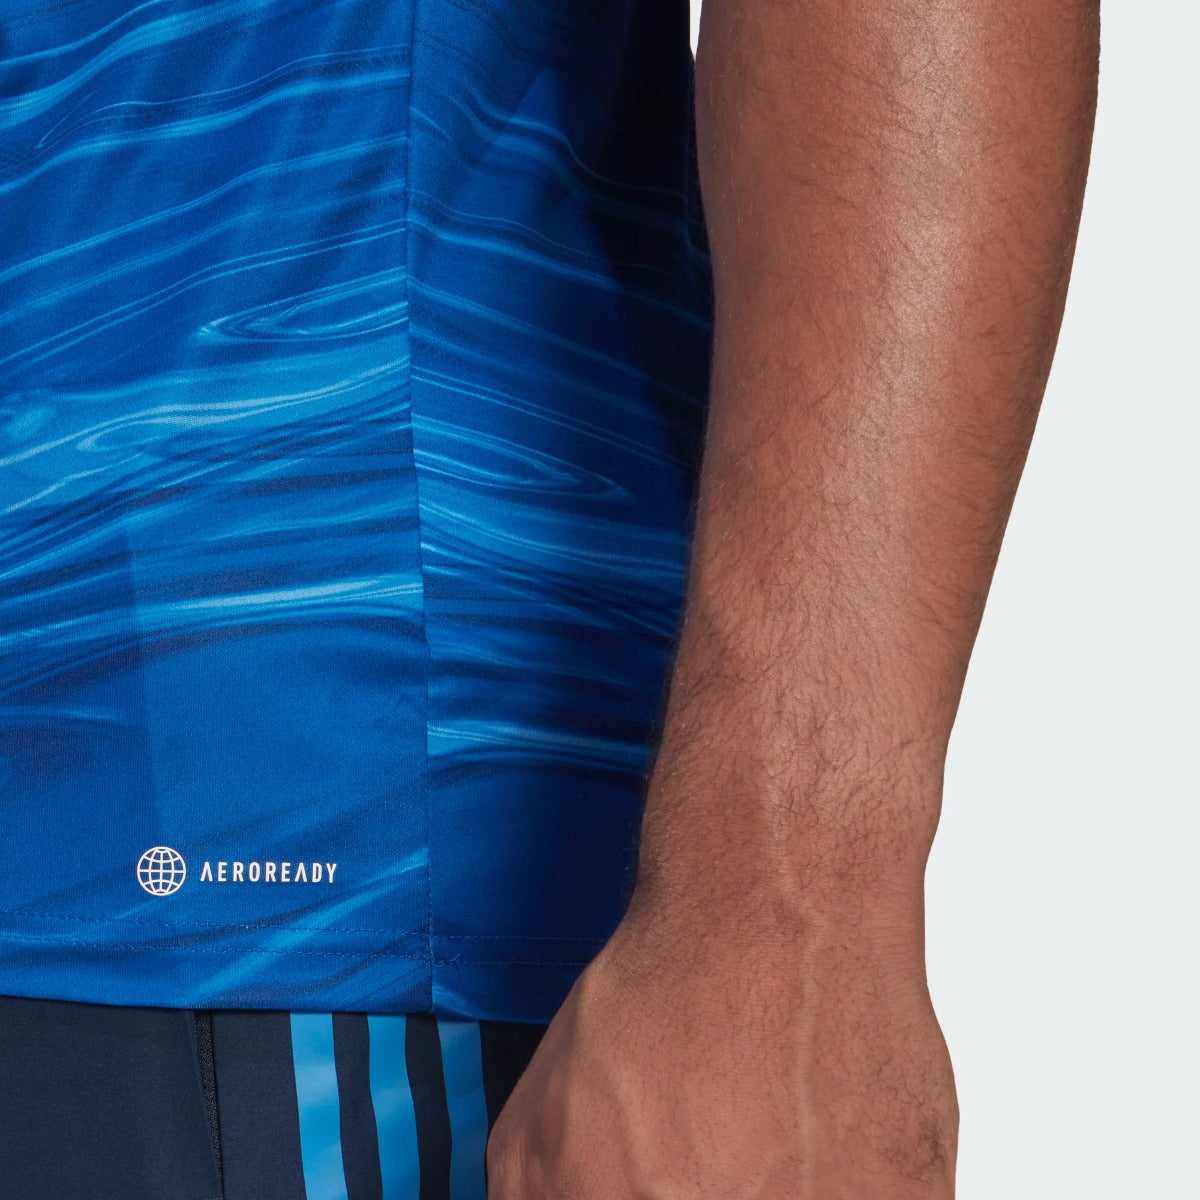 Adidas Super Rugby Blues Perfromance Singlet Mens